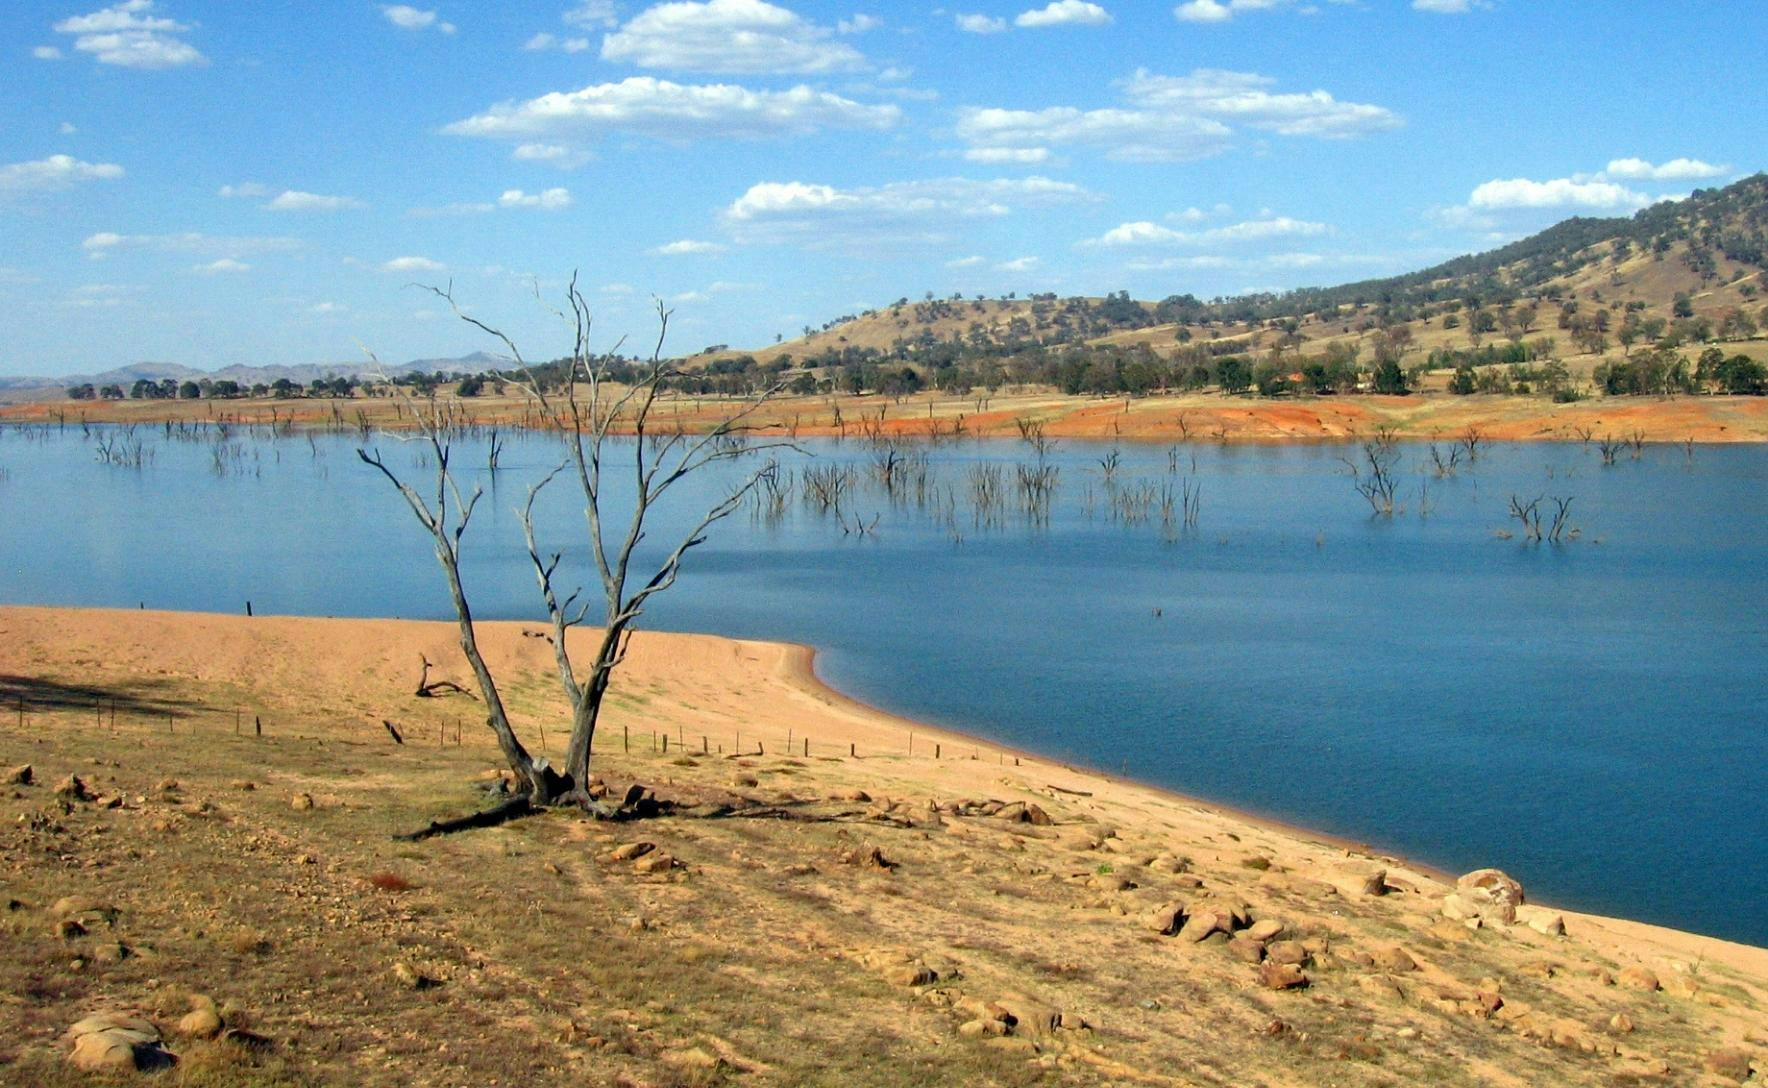 Blue lake surrounded by yellow sandy banks with some trees in the background. A tree in the foreground is dead. The sky is blue and has a few white clouds